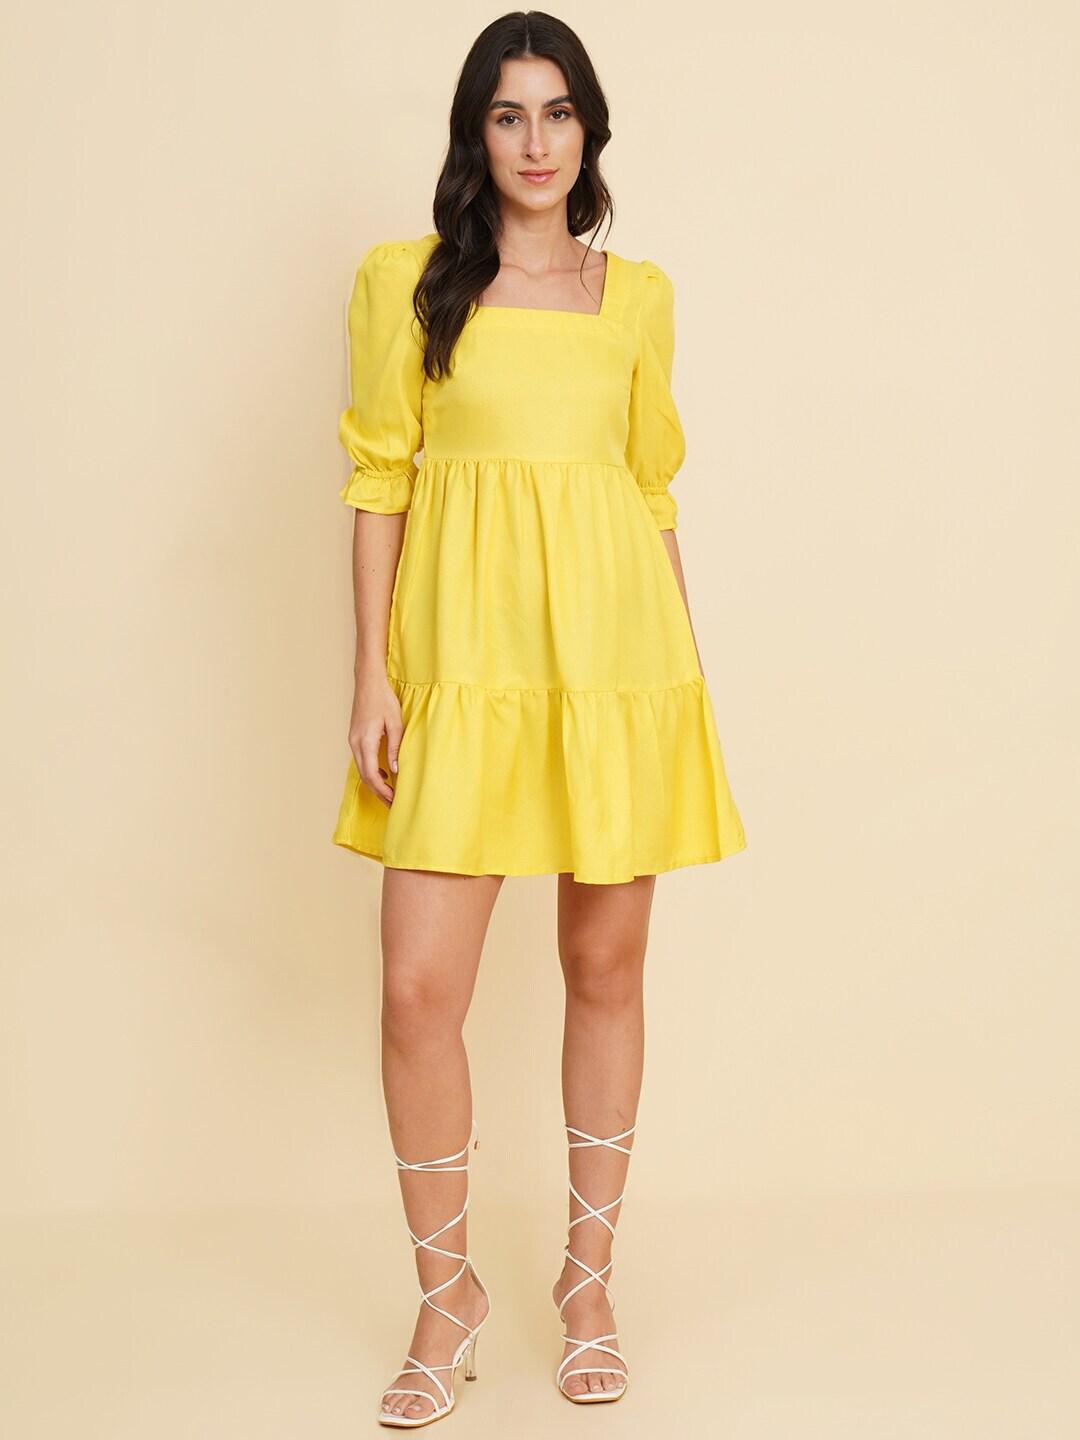 HOUSE OF KKARMA Square Neck Puff Sleeve Fit & Flare Dress